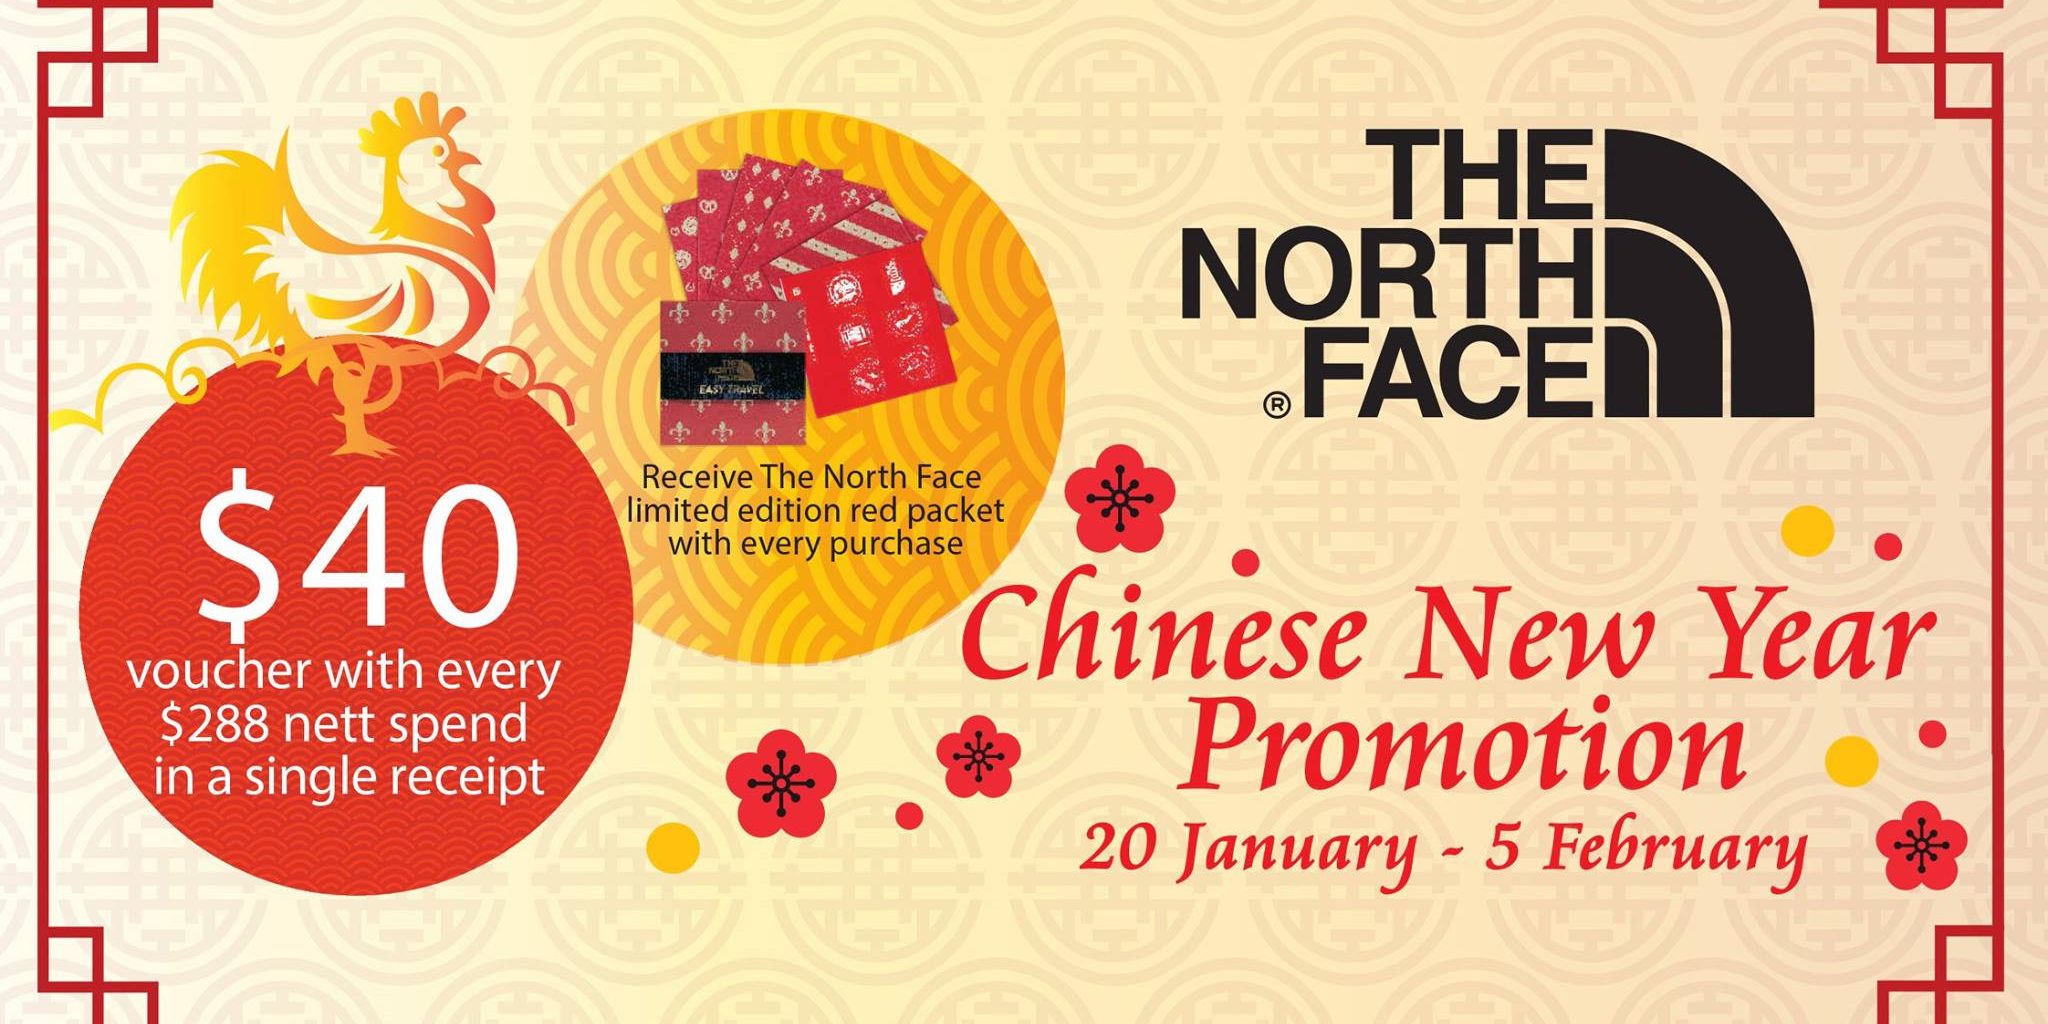 LIV ACTIV Singapore The North Face Prosperity Buys Chinese New Year Promotion 20 Jan – 5 Feb 2017